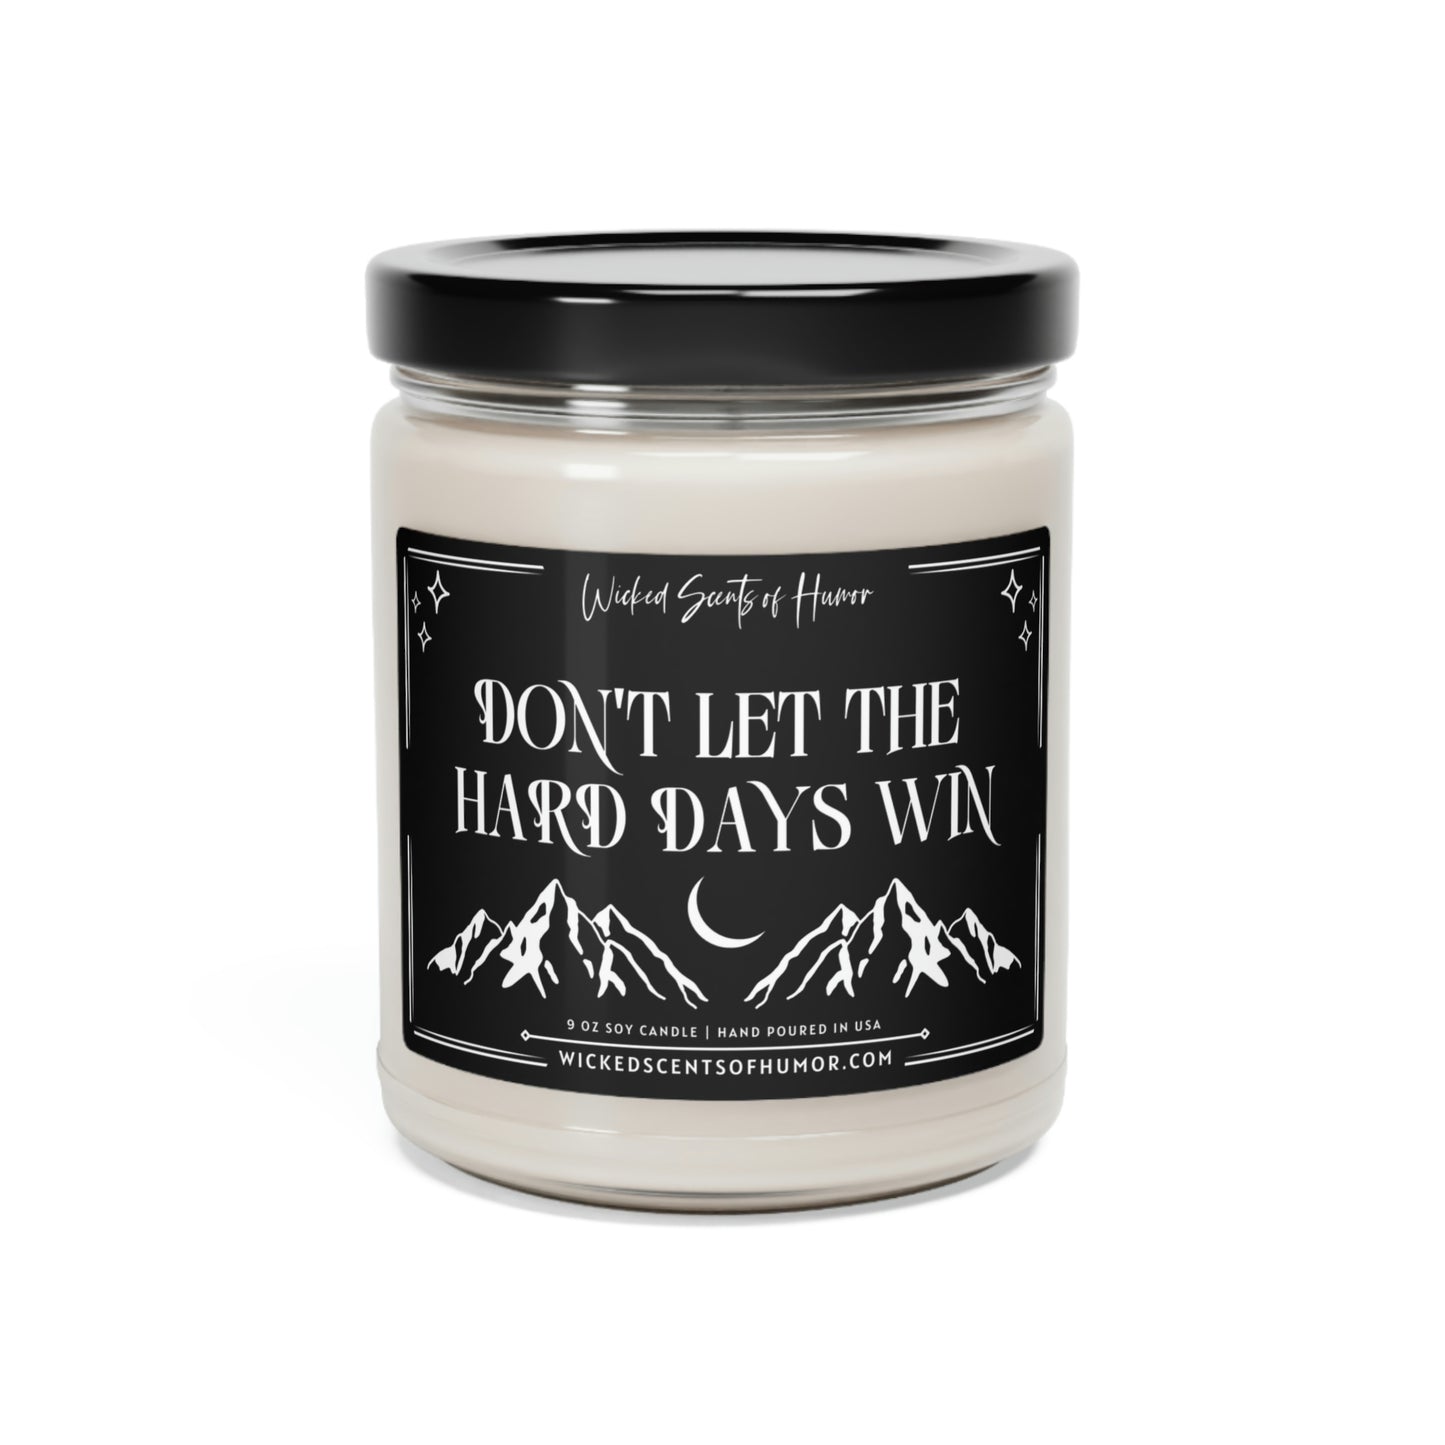 Don't Let the Hard Days Win, ACOMAF, Bookish Gift, Reader Gift, Funny Adult Candles, All Natural 9oz Soy Candle, ACOTAR Merch